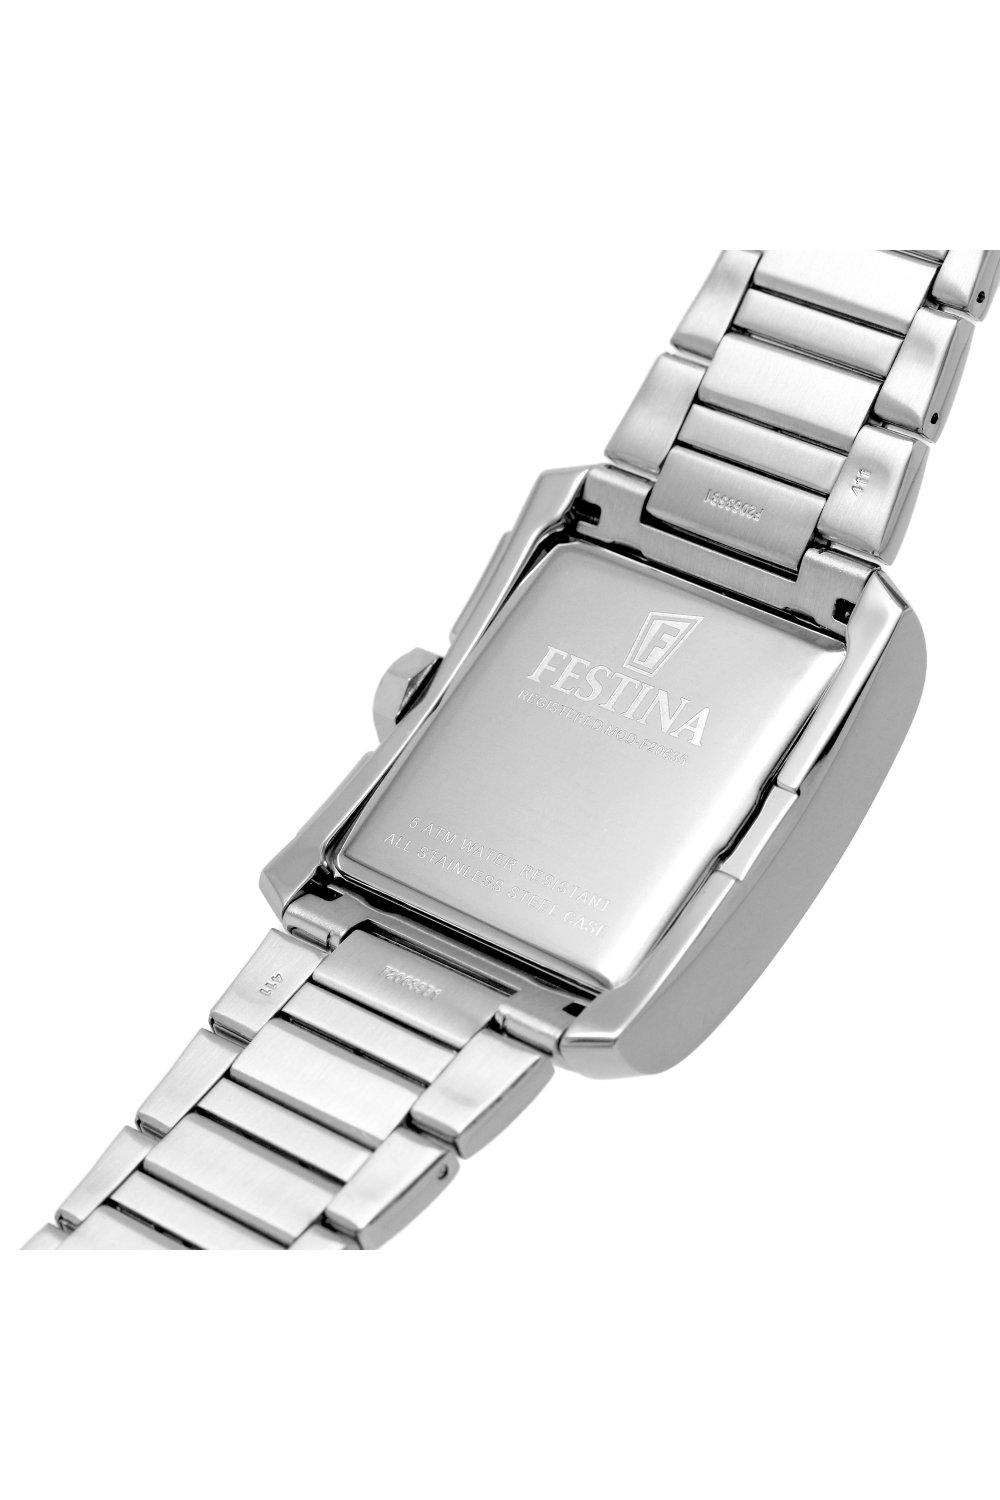 Watches | Timeless Chronograph Stainless Steel Classic Quartz Watch - F20635 /3 | Festina